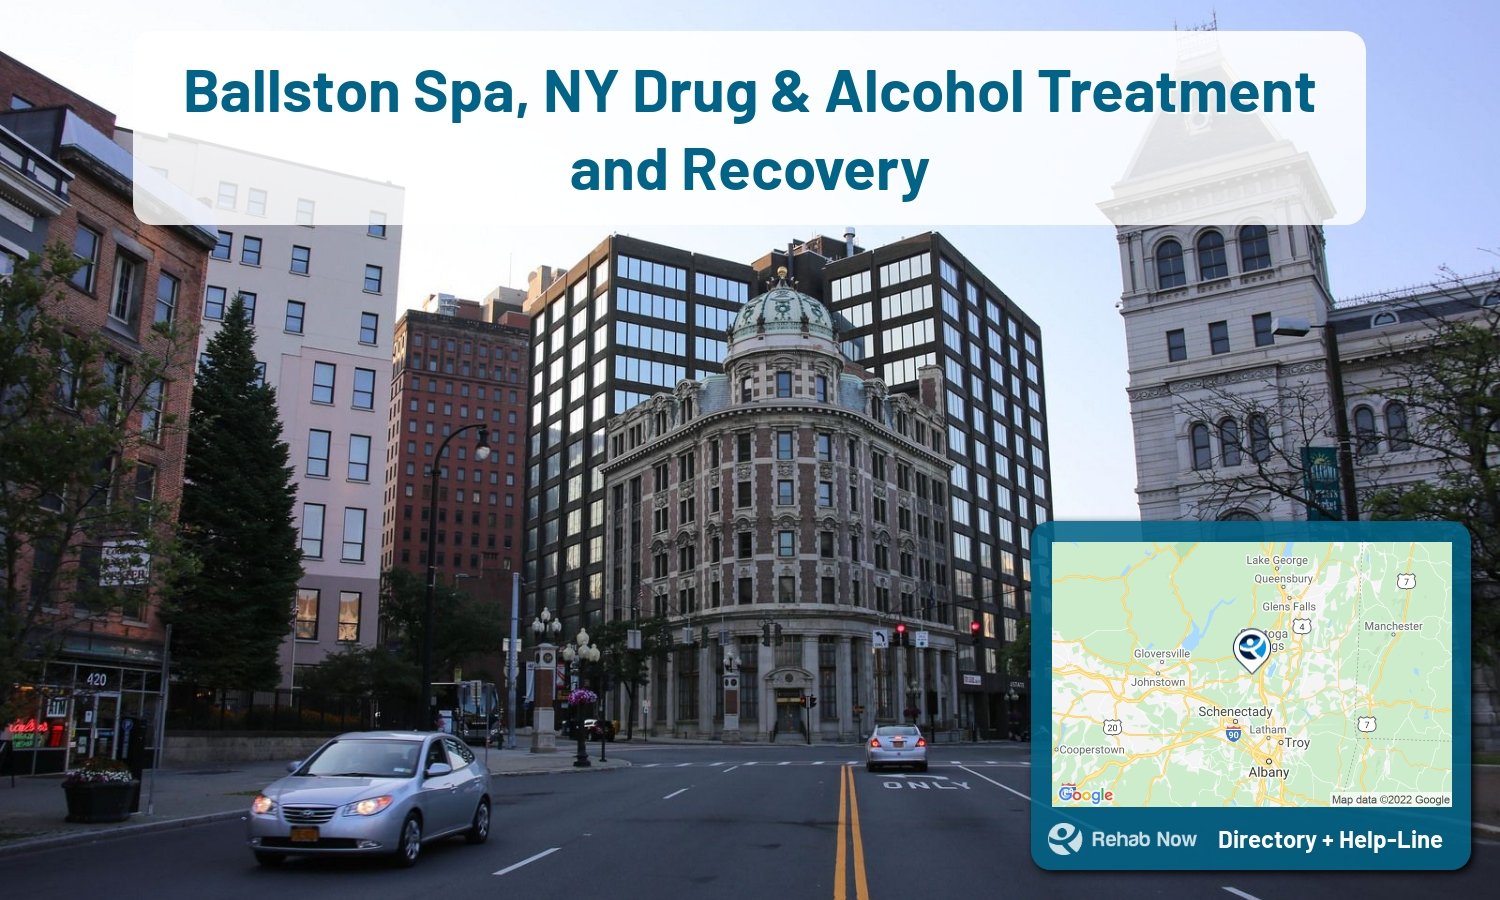 Ready to pick a rehab center in Ballston Spa? Get off alcohol, opiates, and other drugs, by selecting top drug rehab centers in New York